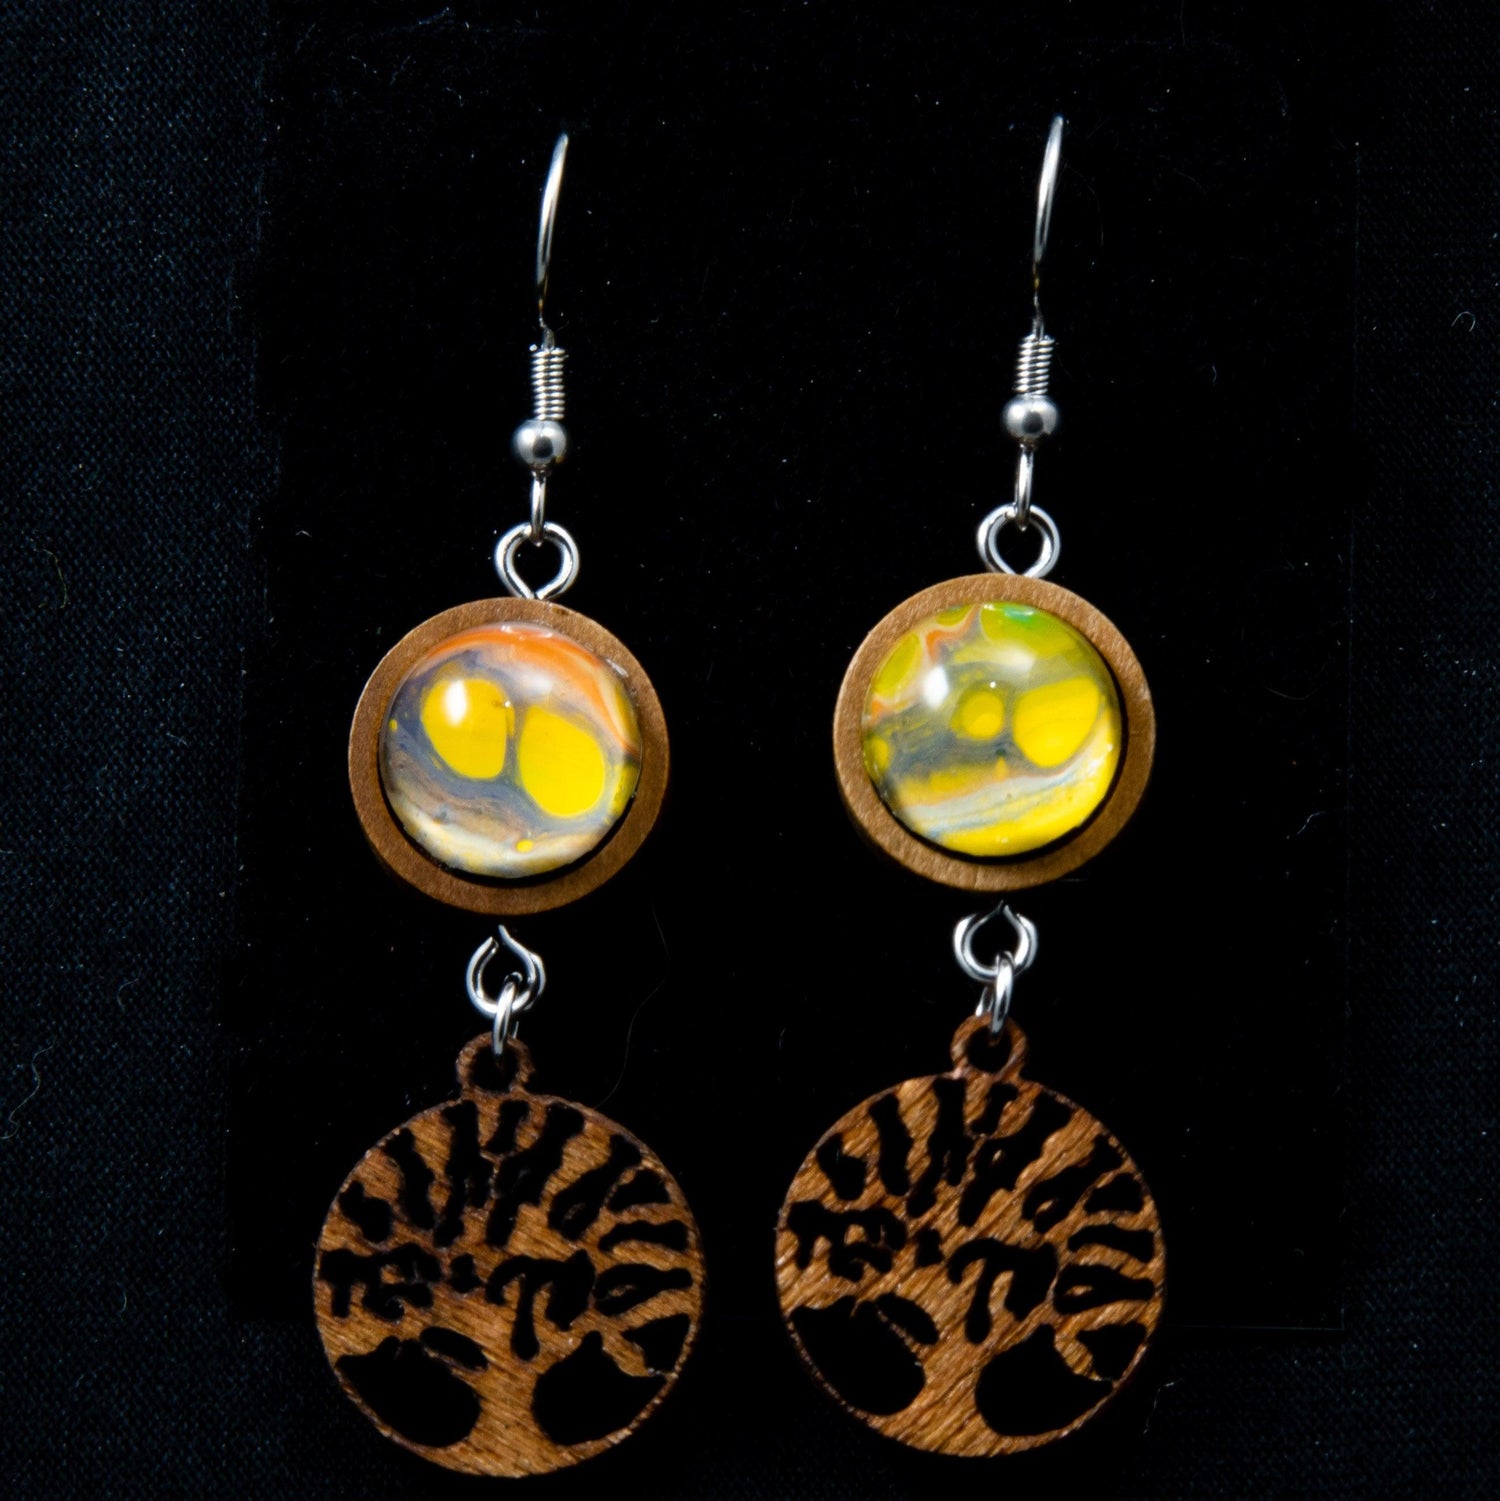 Wooden Wearable Art Fish Hook Earrings with Tree of Life Charm - Cinder House Creations